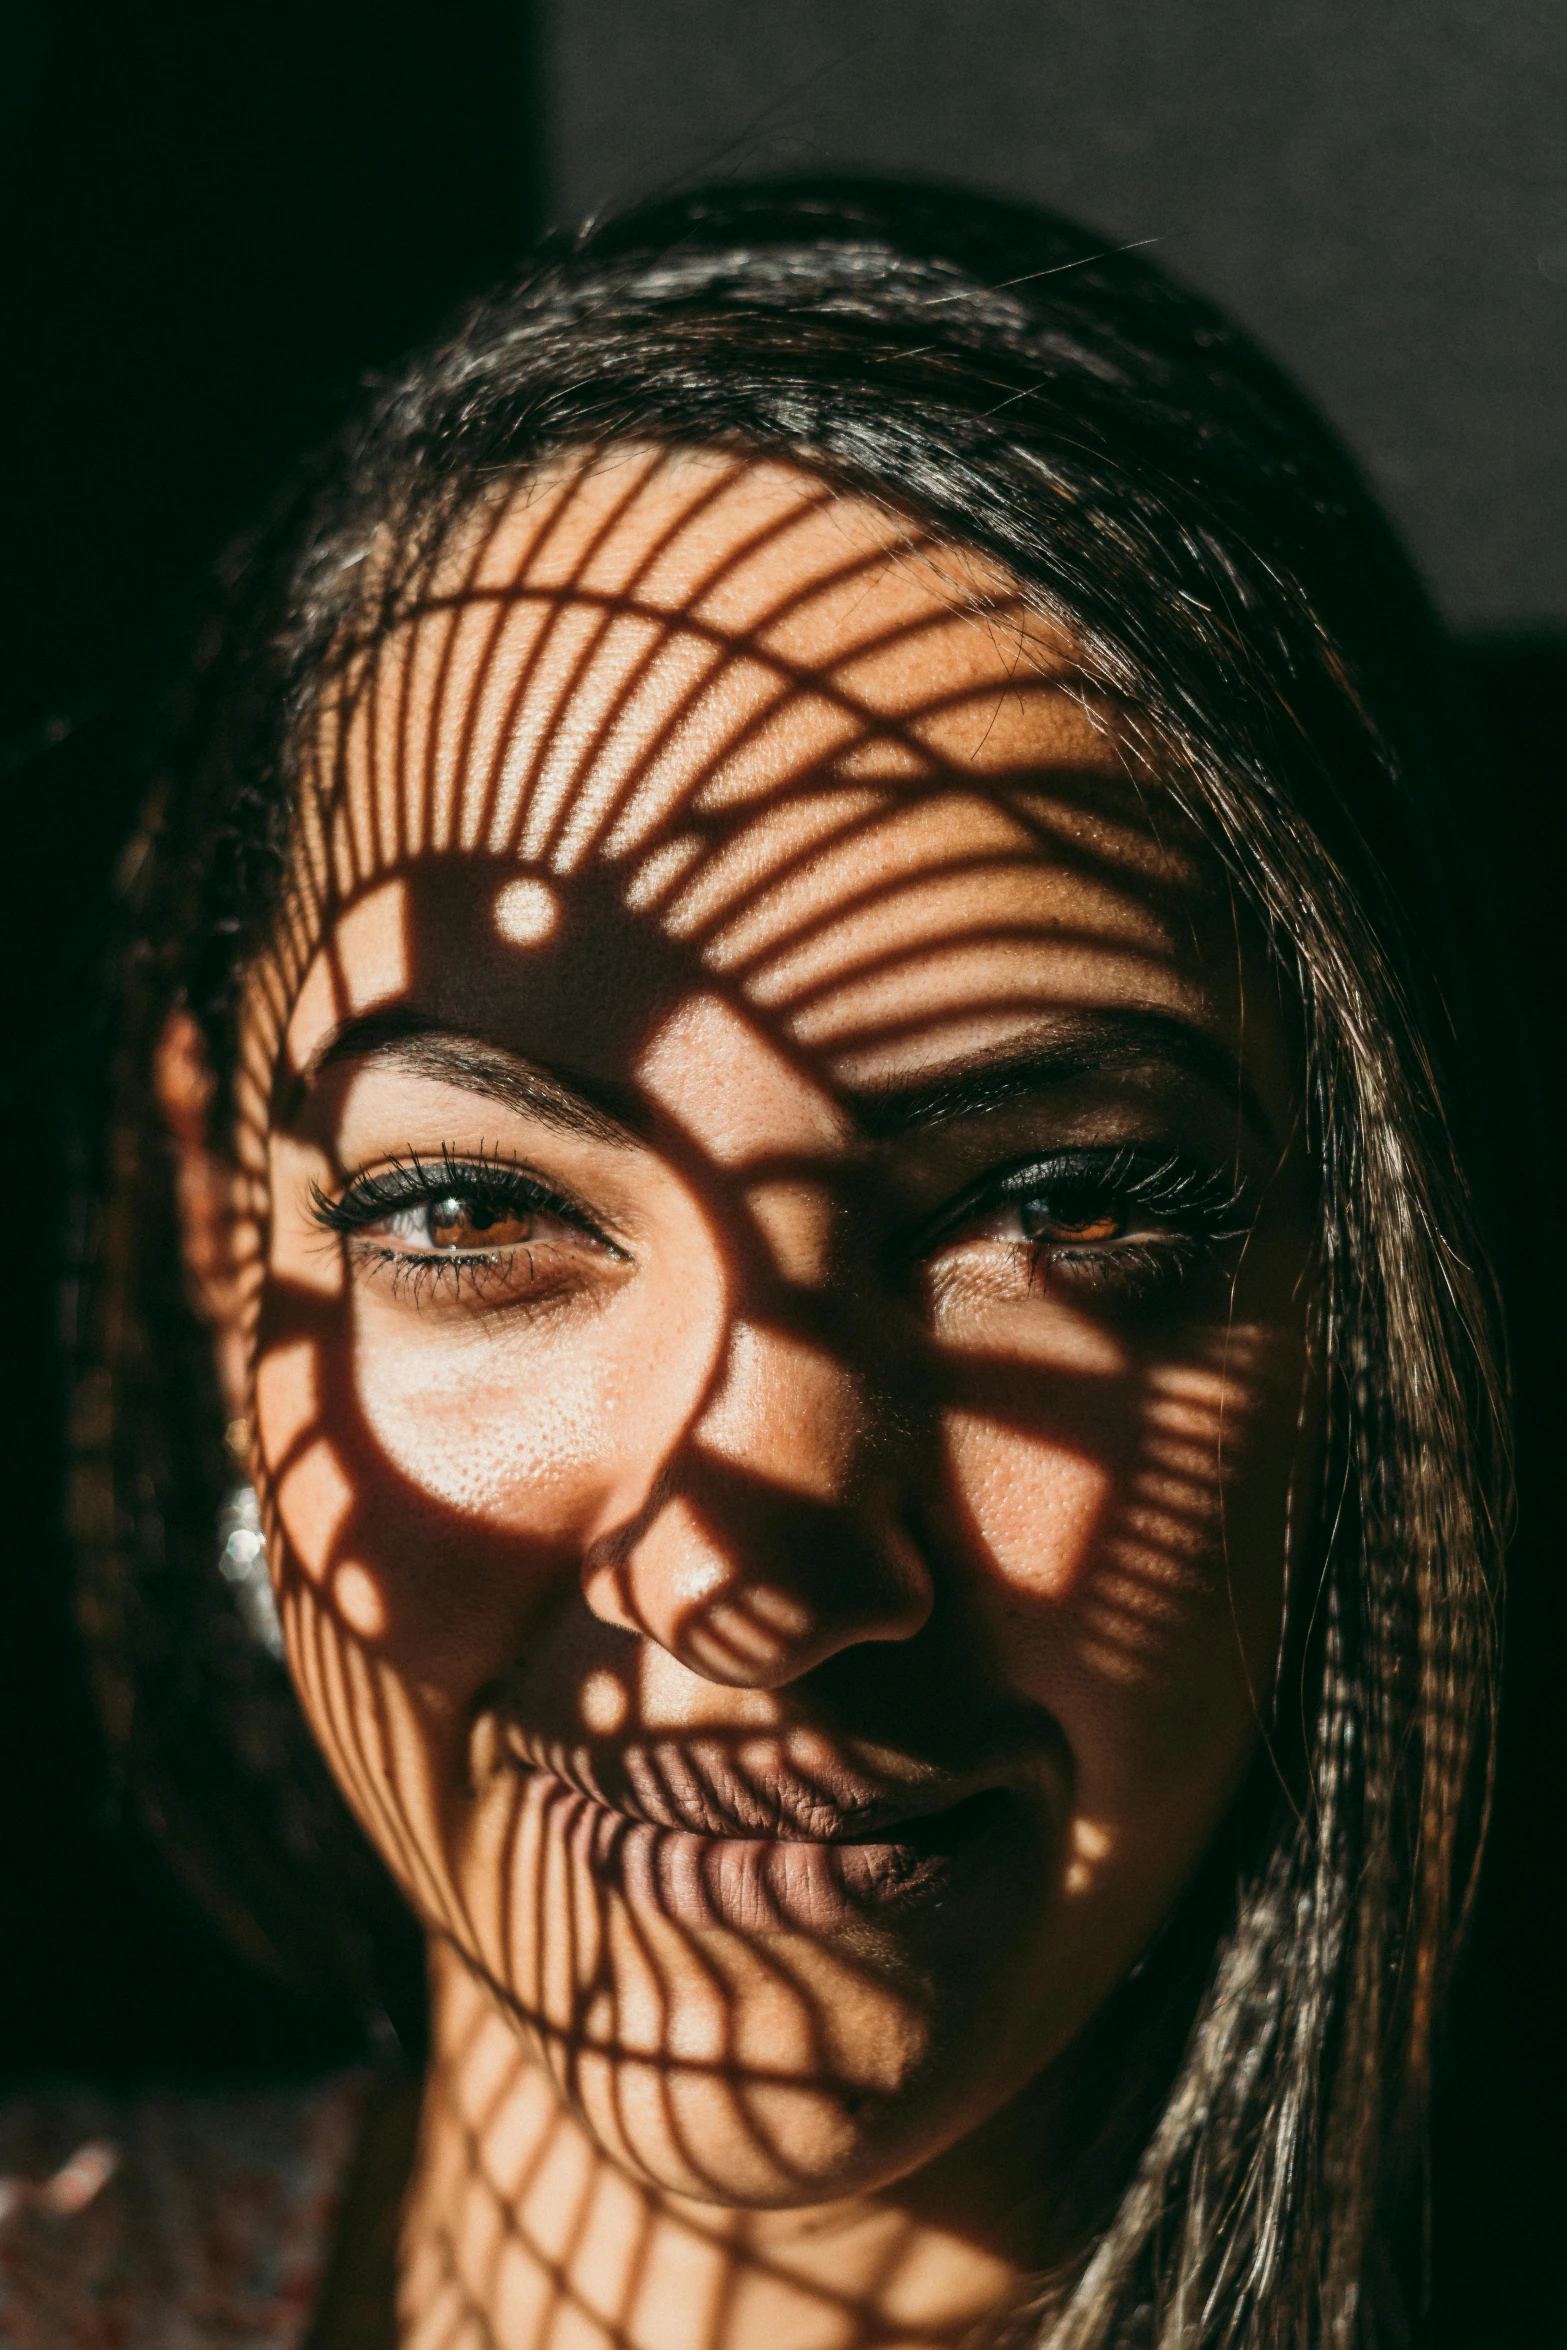 a close up of a person with long hair, pexels contest winner, optical illusion, faces covered in shadows, smiling woman, tan skin, backlight